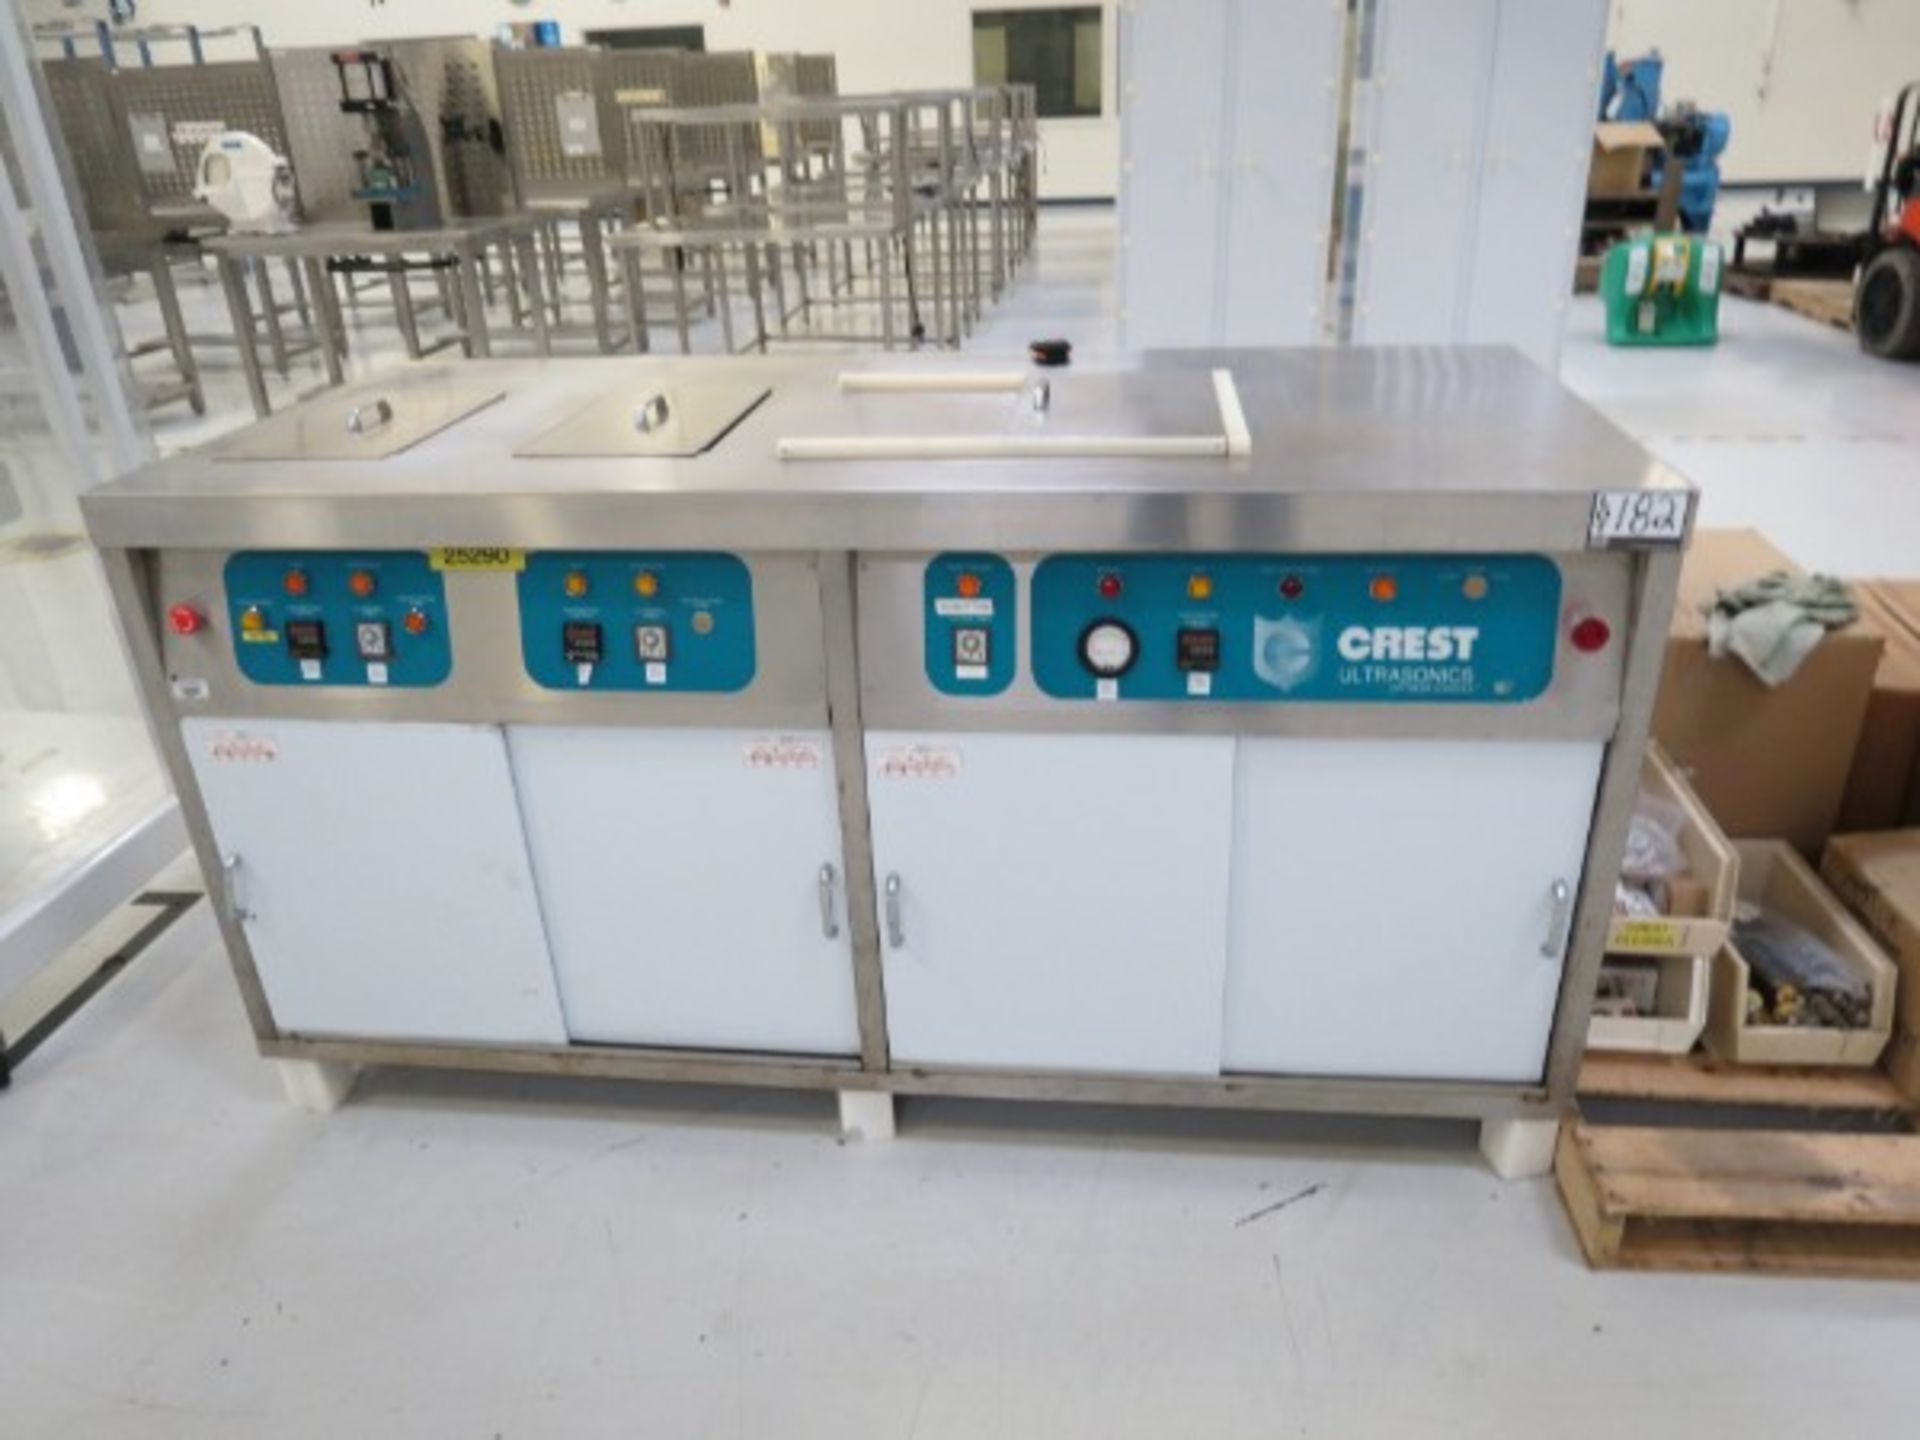 Crest Optimim C03-1014-HE Ultrasonic Cleaning console, heated wash & rinse stations, s/n 1293-T-1102